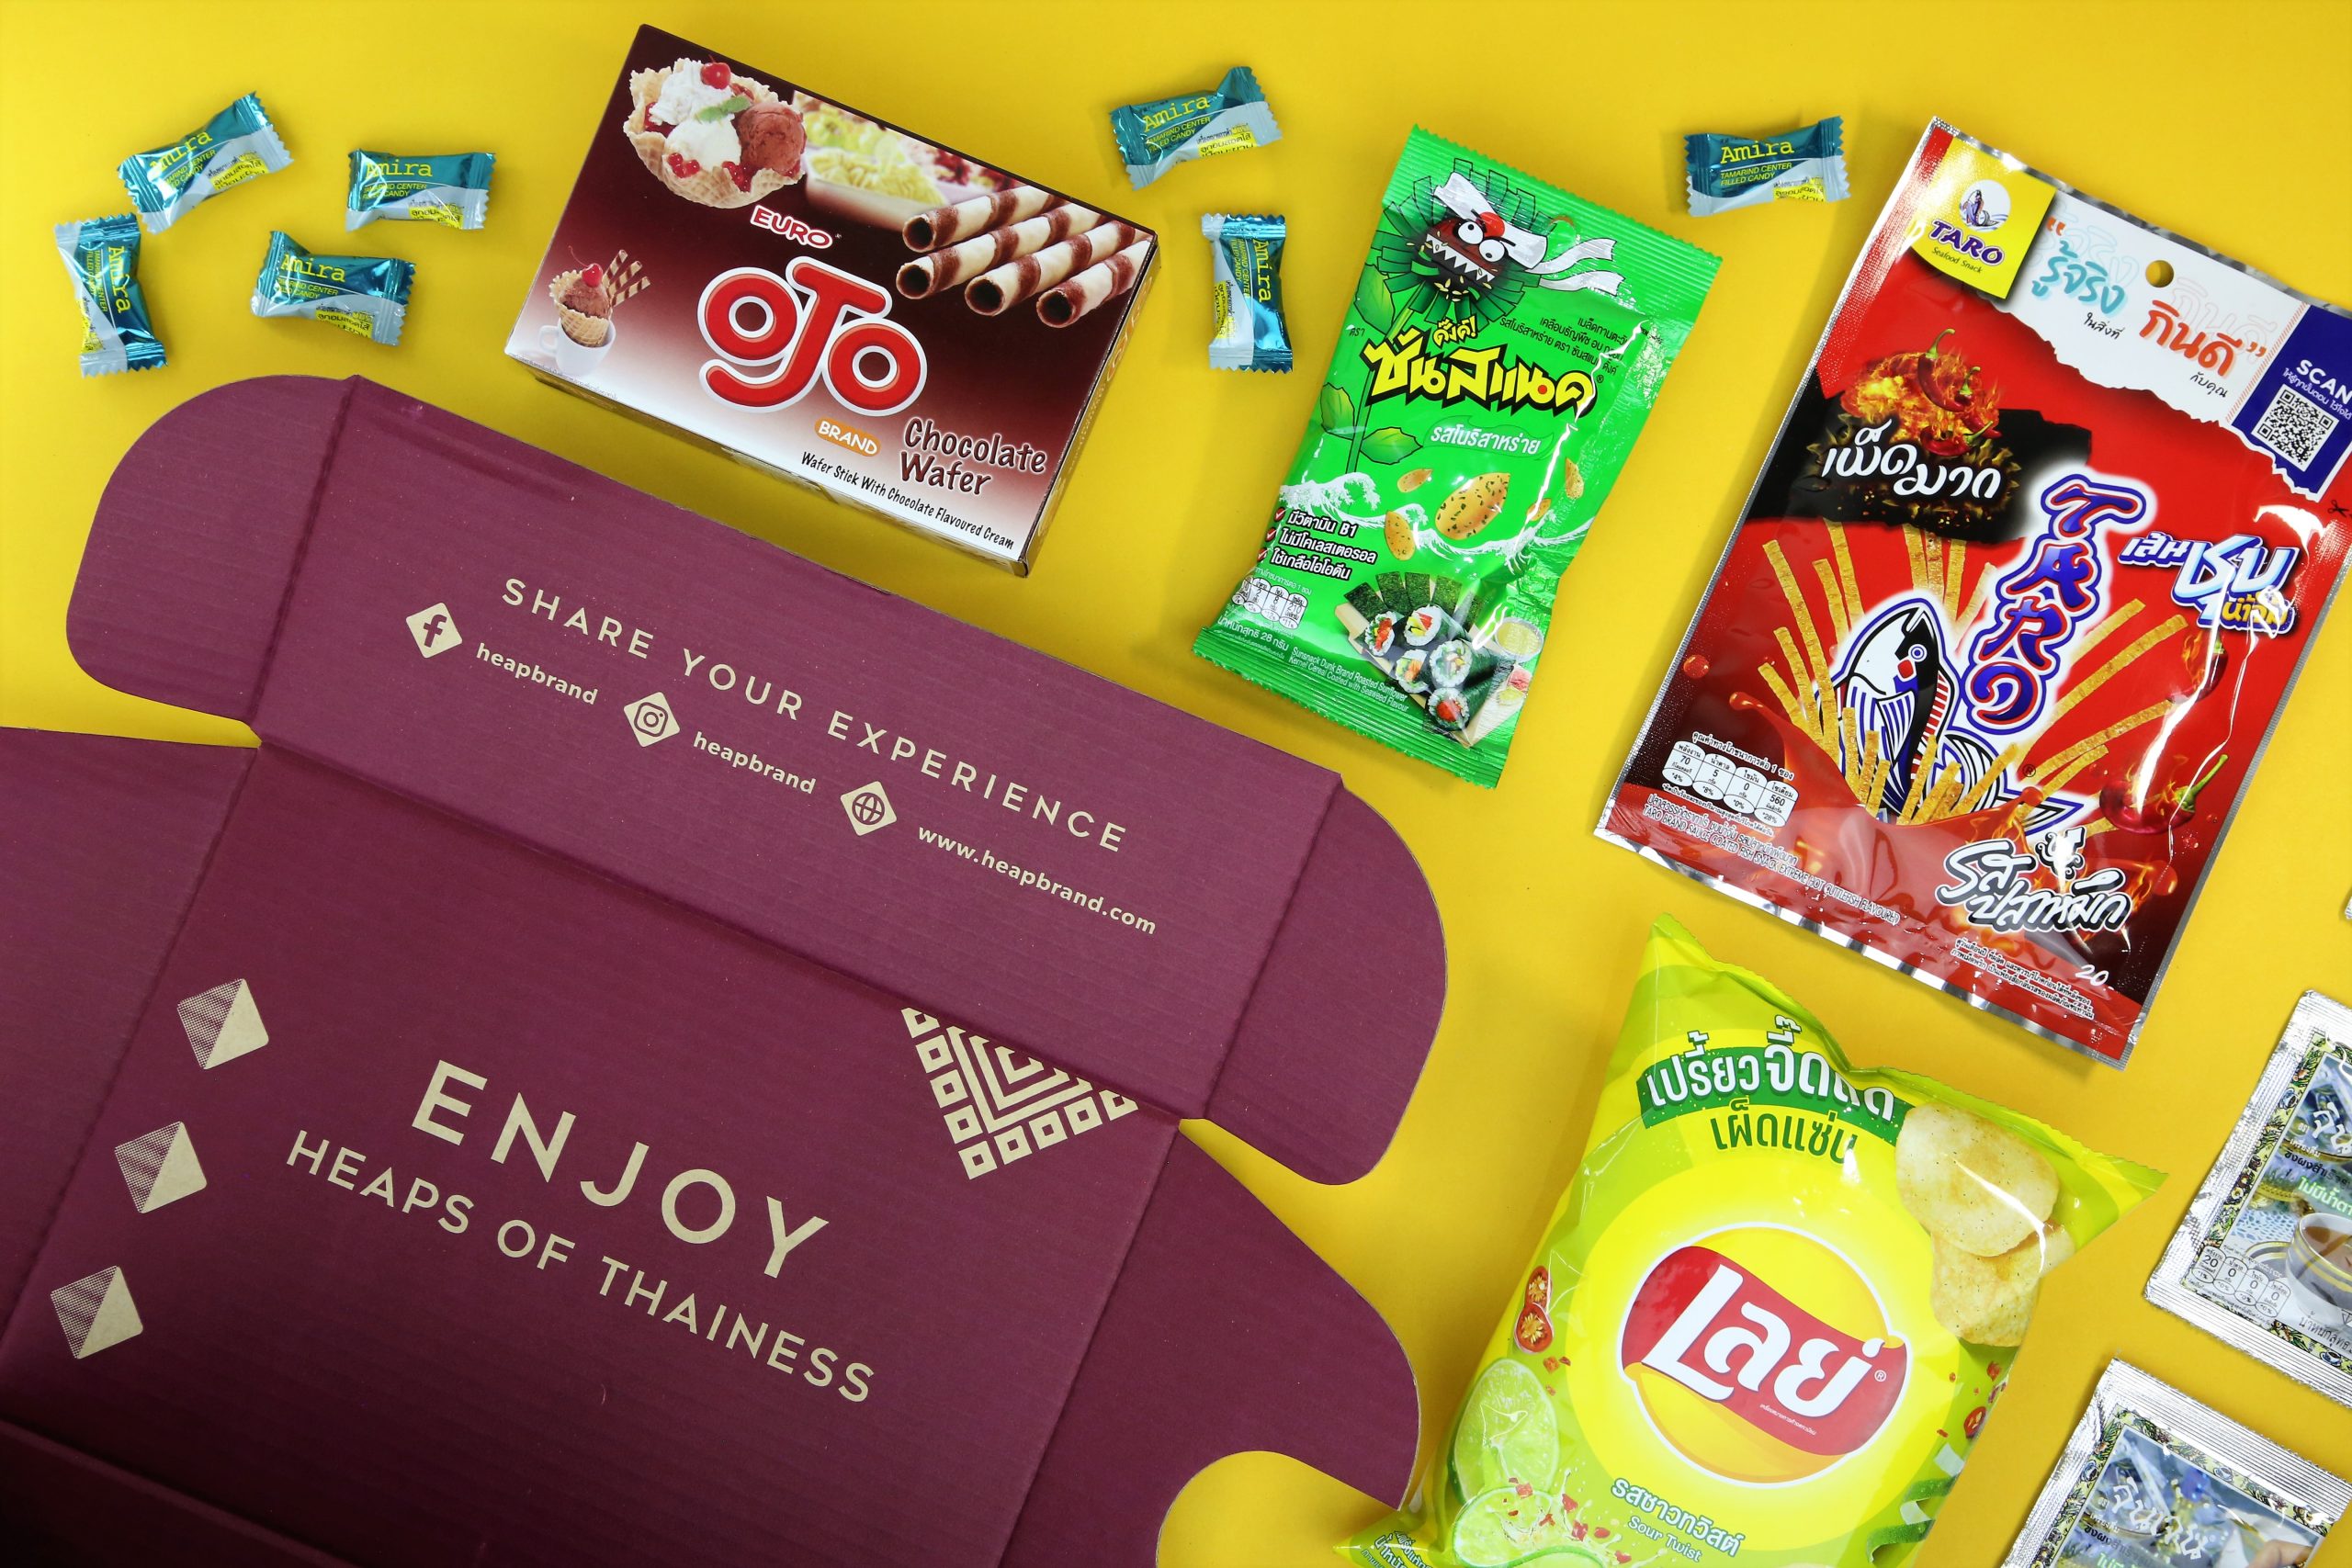 curated Thai snack box gift from Thailand. Includes spicy snack and limited flavor candy